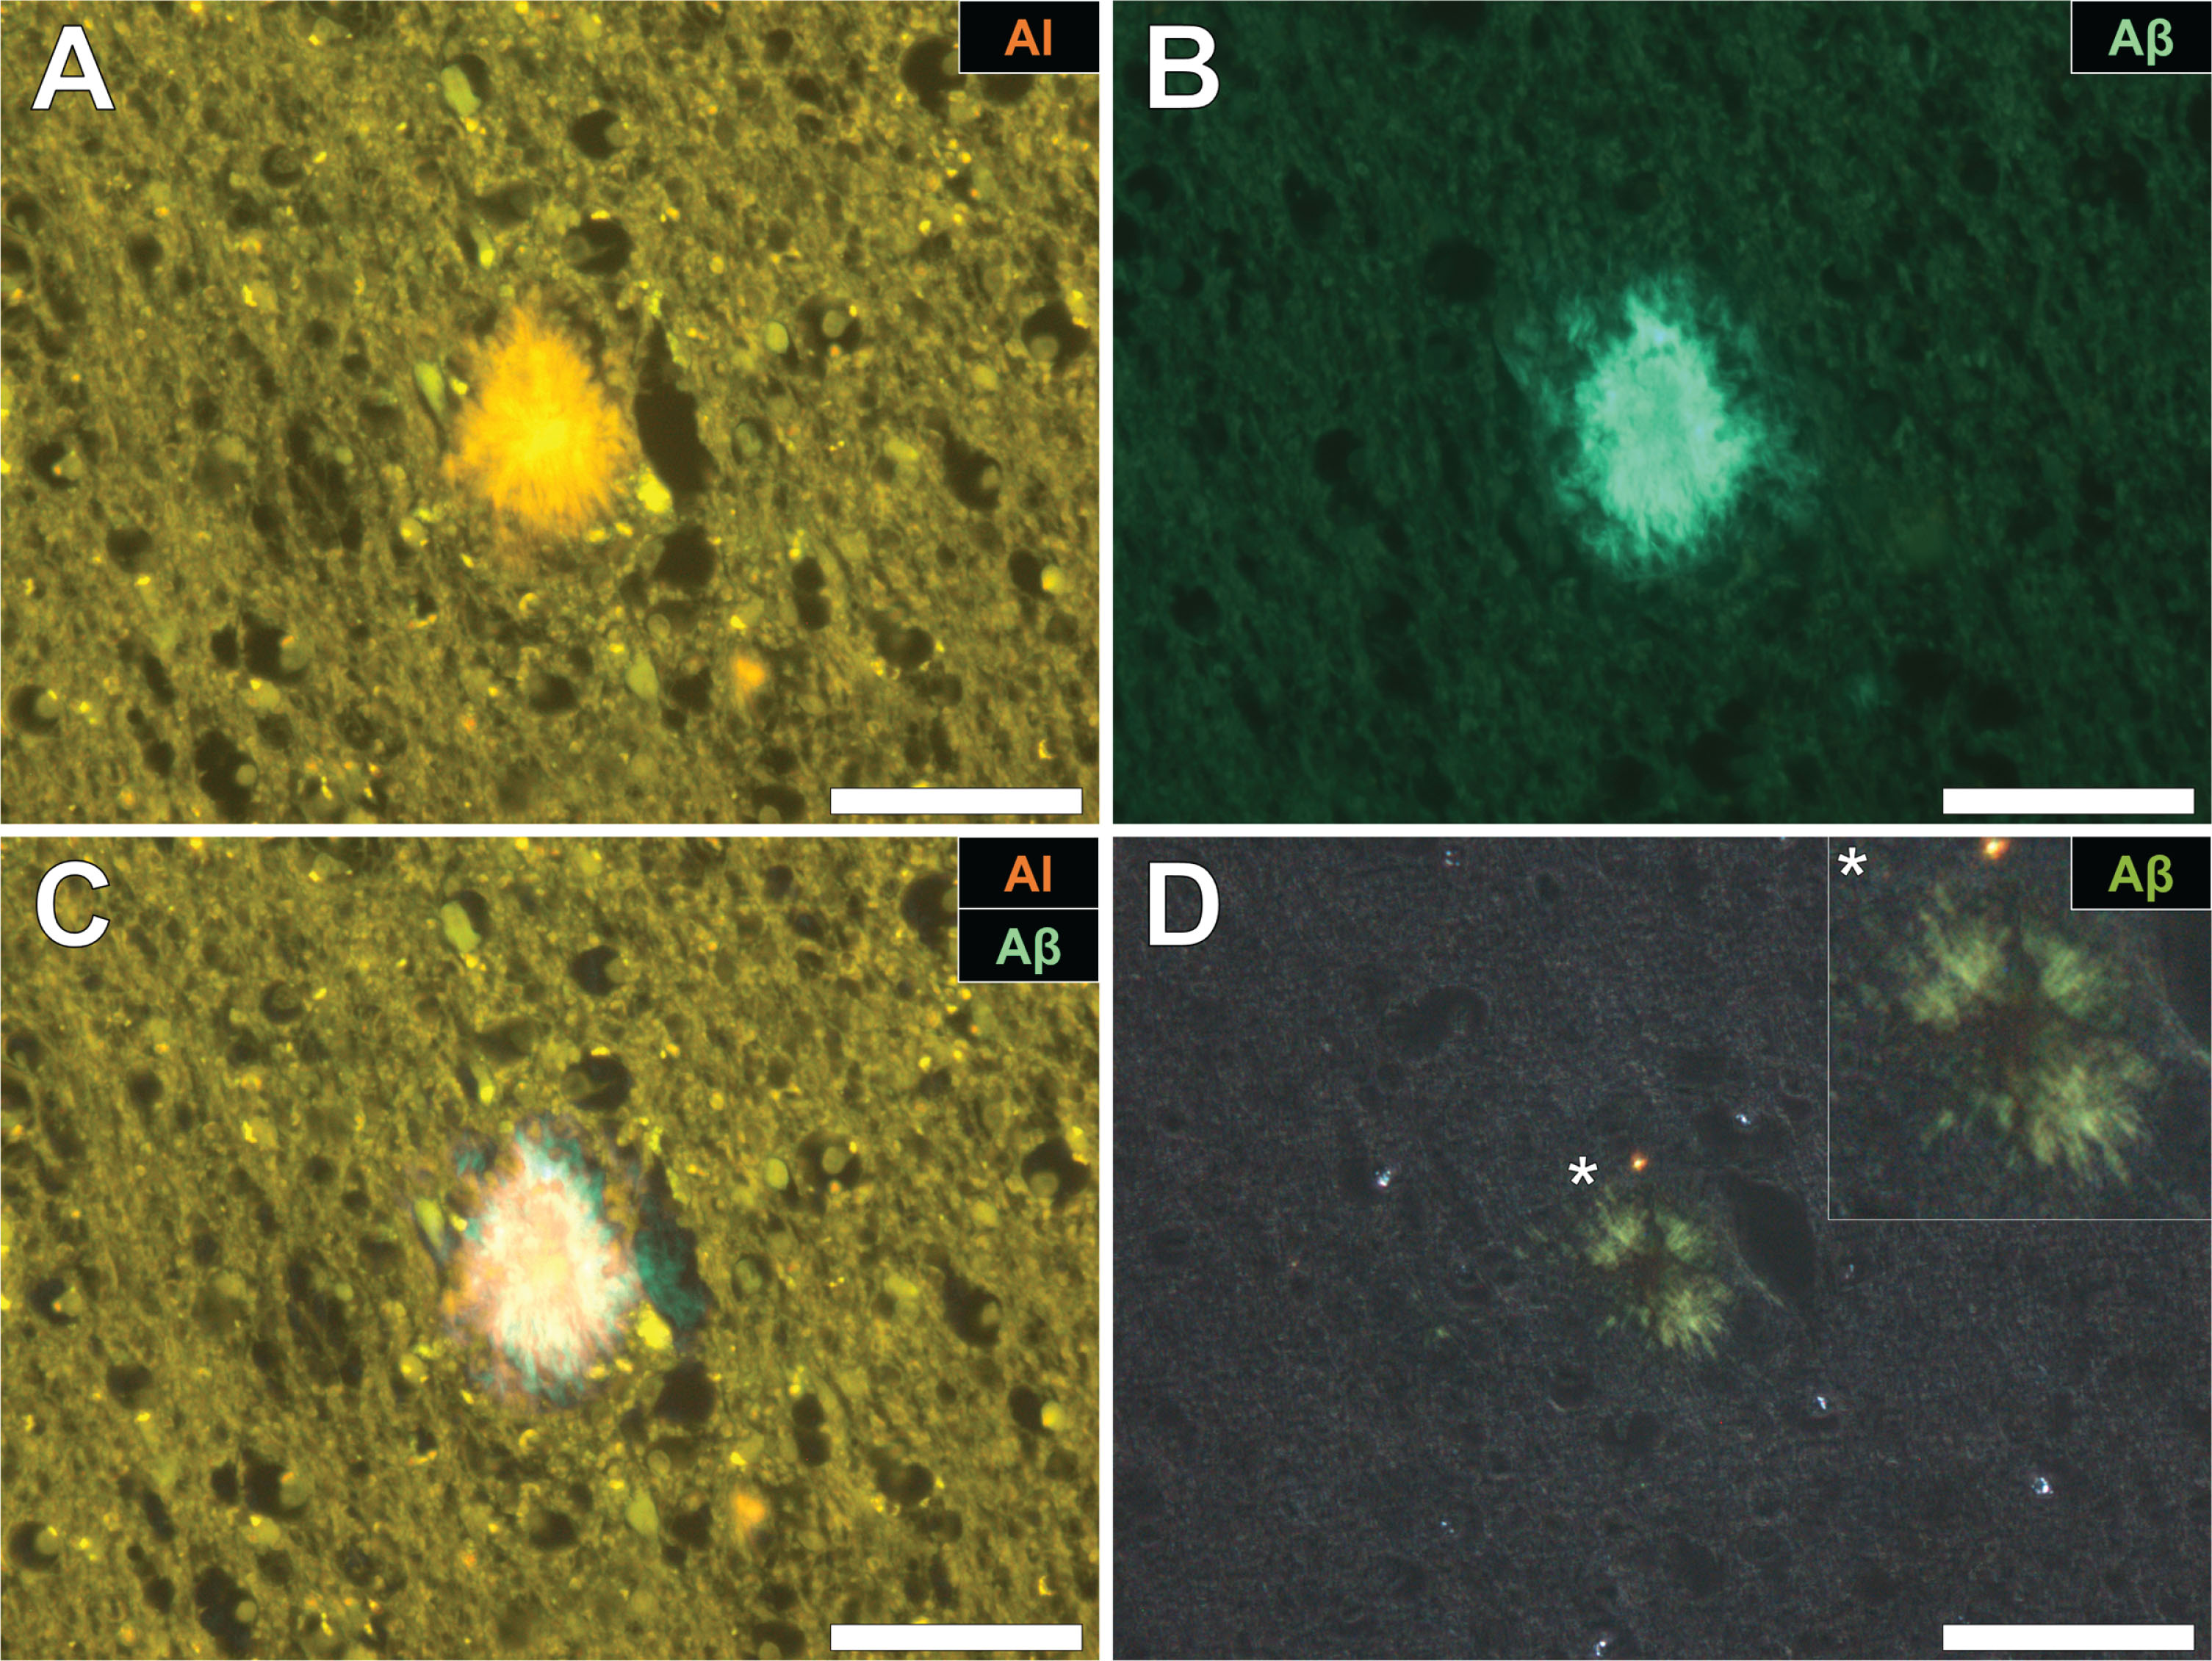 Aluminum and amyloid-β co-located in a senile plaque in the grey-white matter interface of the parietal lobe of a donor with fAD. A) Aluminum was detected via an orange fluorescence emission upon lumogallion staining. B) ThS-reactive fluorescence (green) indicative of amyloid-β in the identical senile plaque. C) Merging of fluorescence channels reveals co-localization of aluminum and amyloid-β. D) Congo red staining of the same tissue region revealed apple-green birefringence in the form of a Maltese-Cross diffraction pattern or spherulite (magnified insert), under polarized light. Magnification: X 400, scale bars = 50 μm.